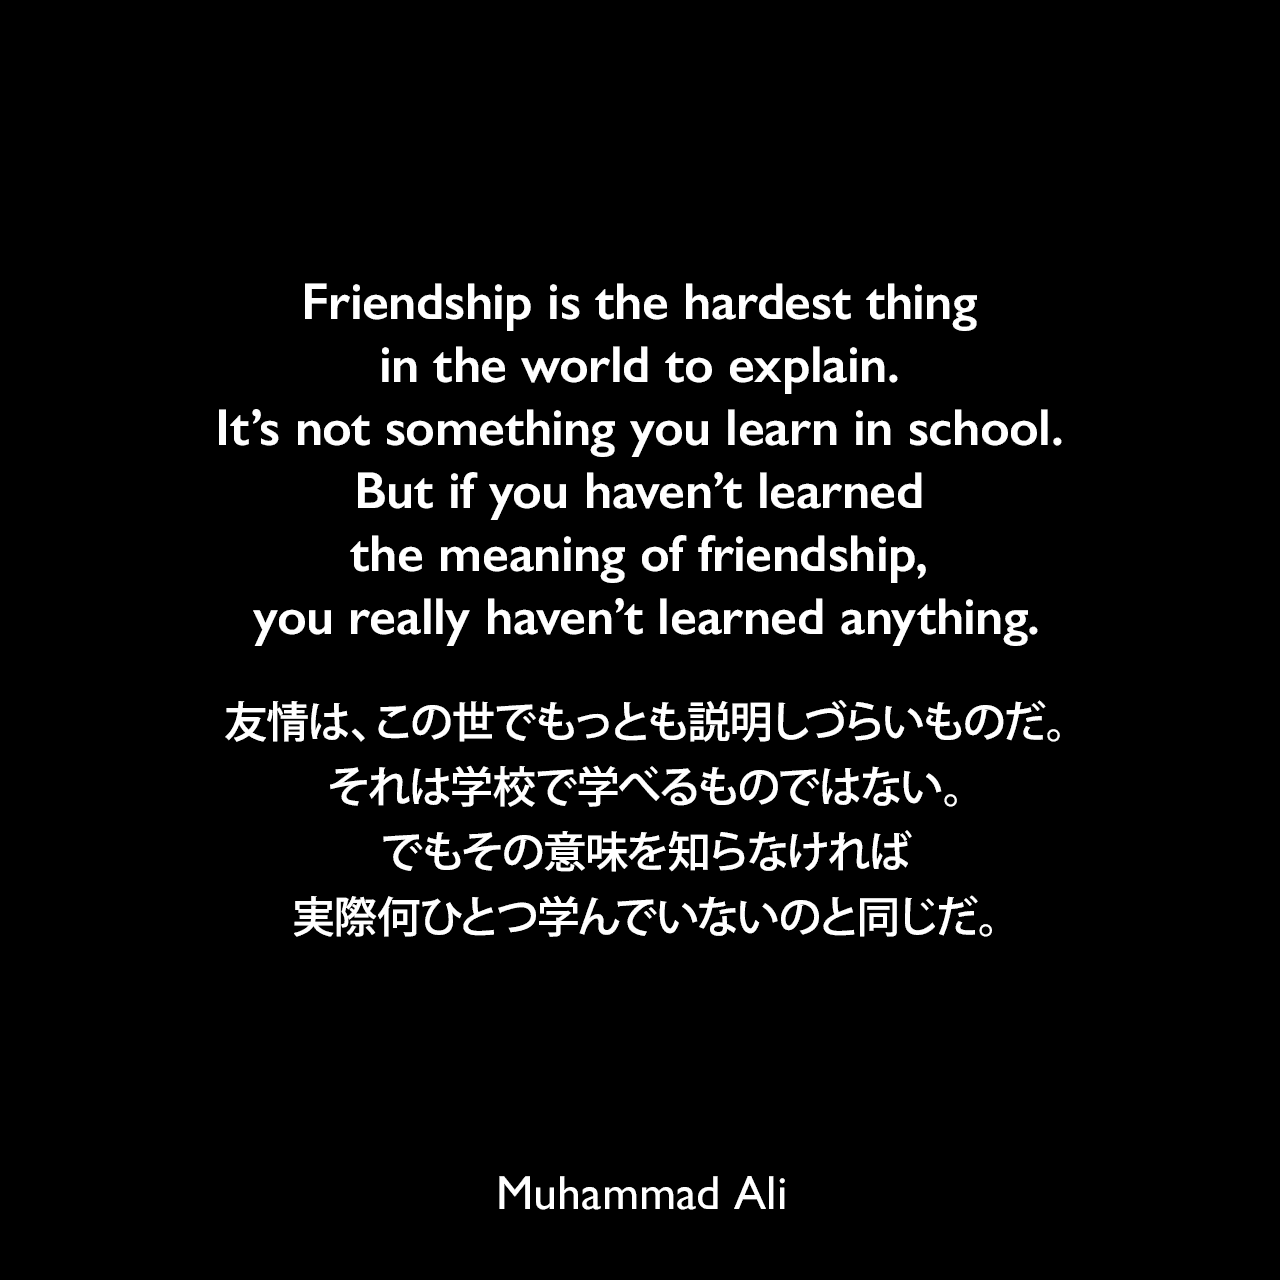 Friendship is the hardest thing in the world to explain. It’s not something you learn in school. But if you haven’t learned the meaning of friendship, you really haven’t learned anything.友情は、この世でもっとも説明しづらいものだ。それは学校で学べるものではない。でもその意味を知らなければ、実際何ひとつ学んでいないのと同じだ。Muhammad Ali